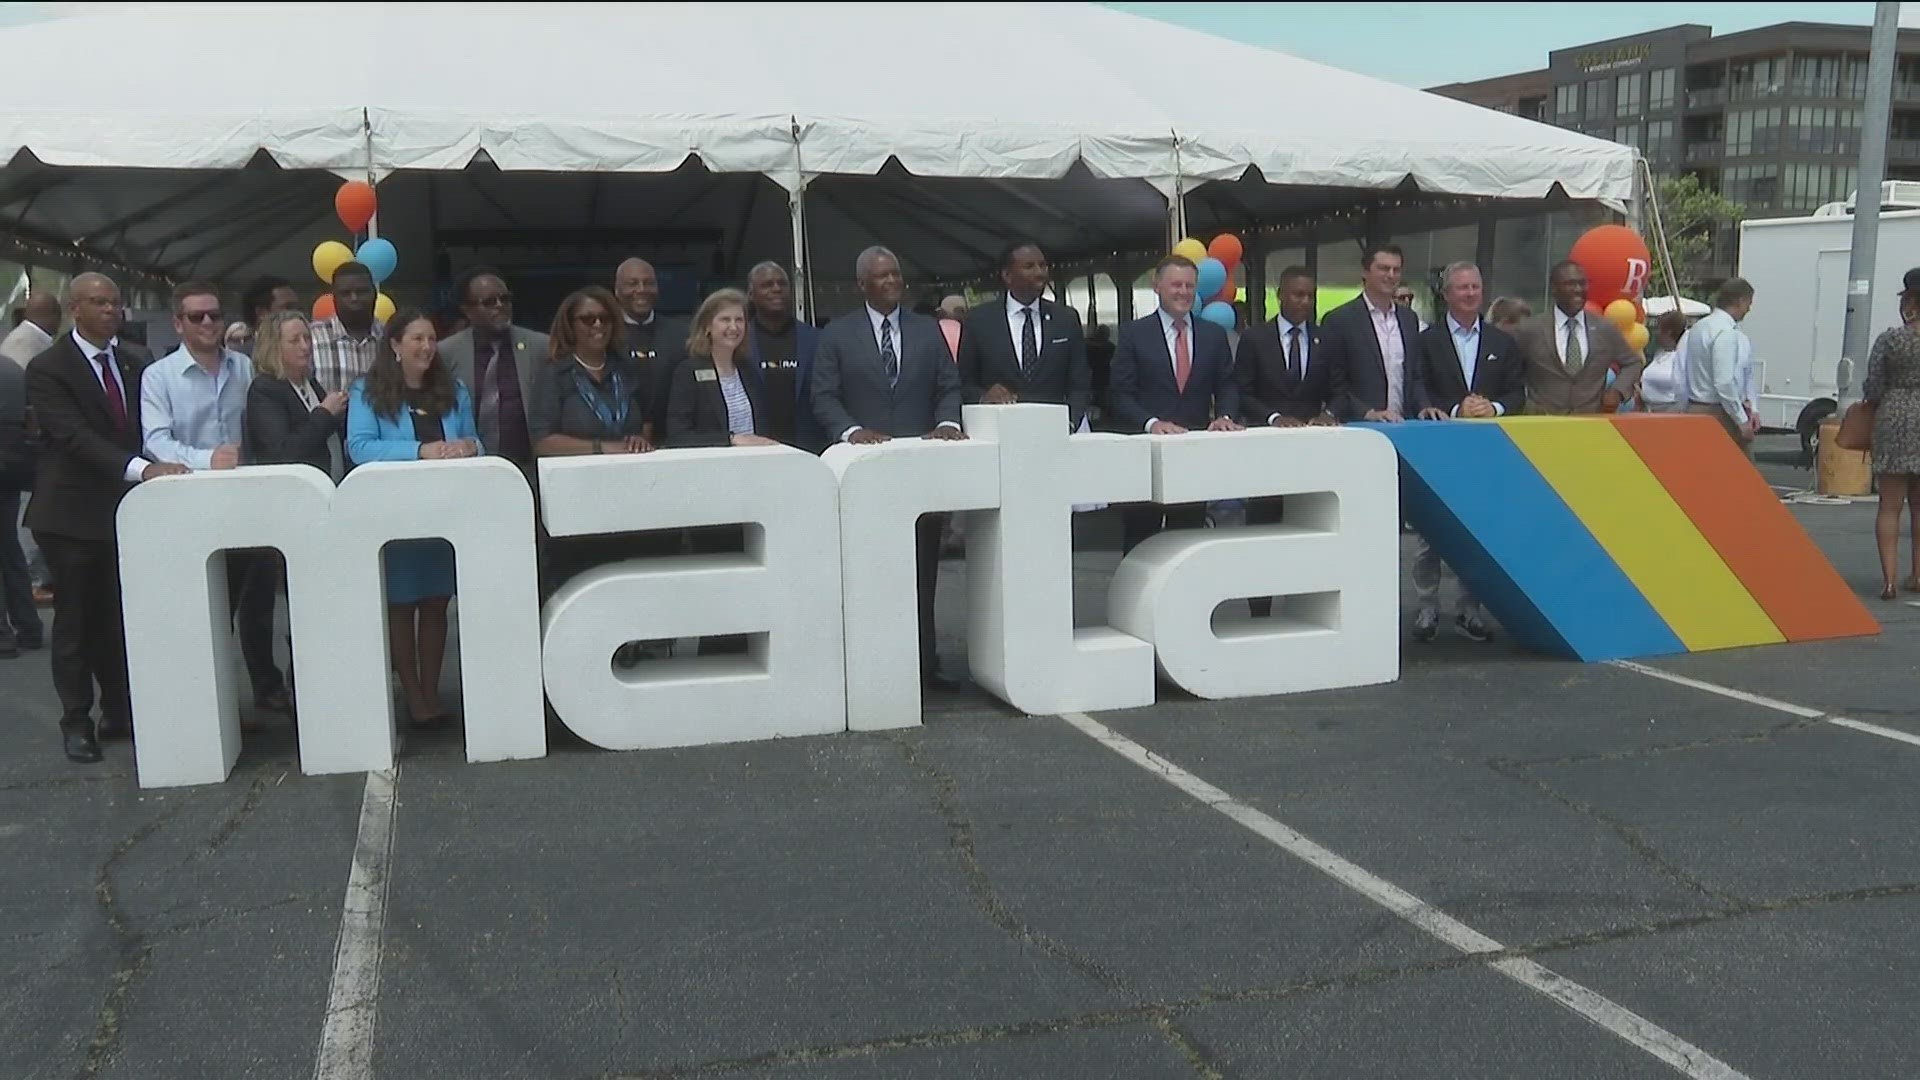 The metro Atlanta transportation hub is looking to hire bus drivers and technicians.